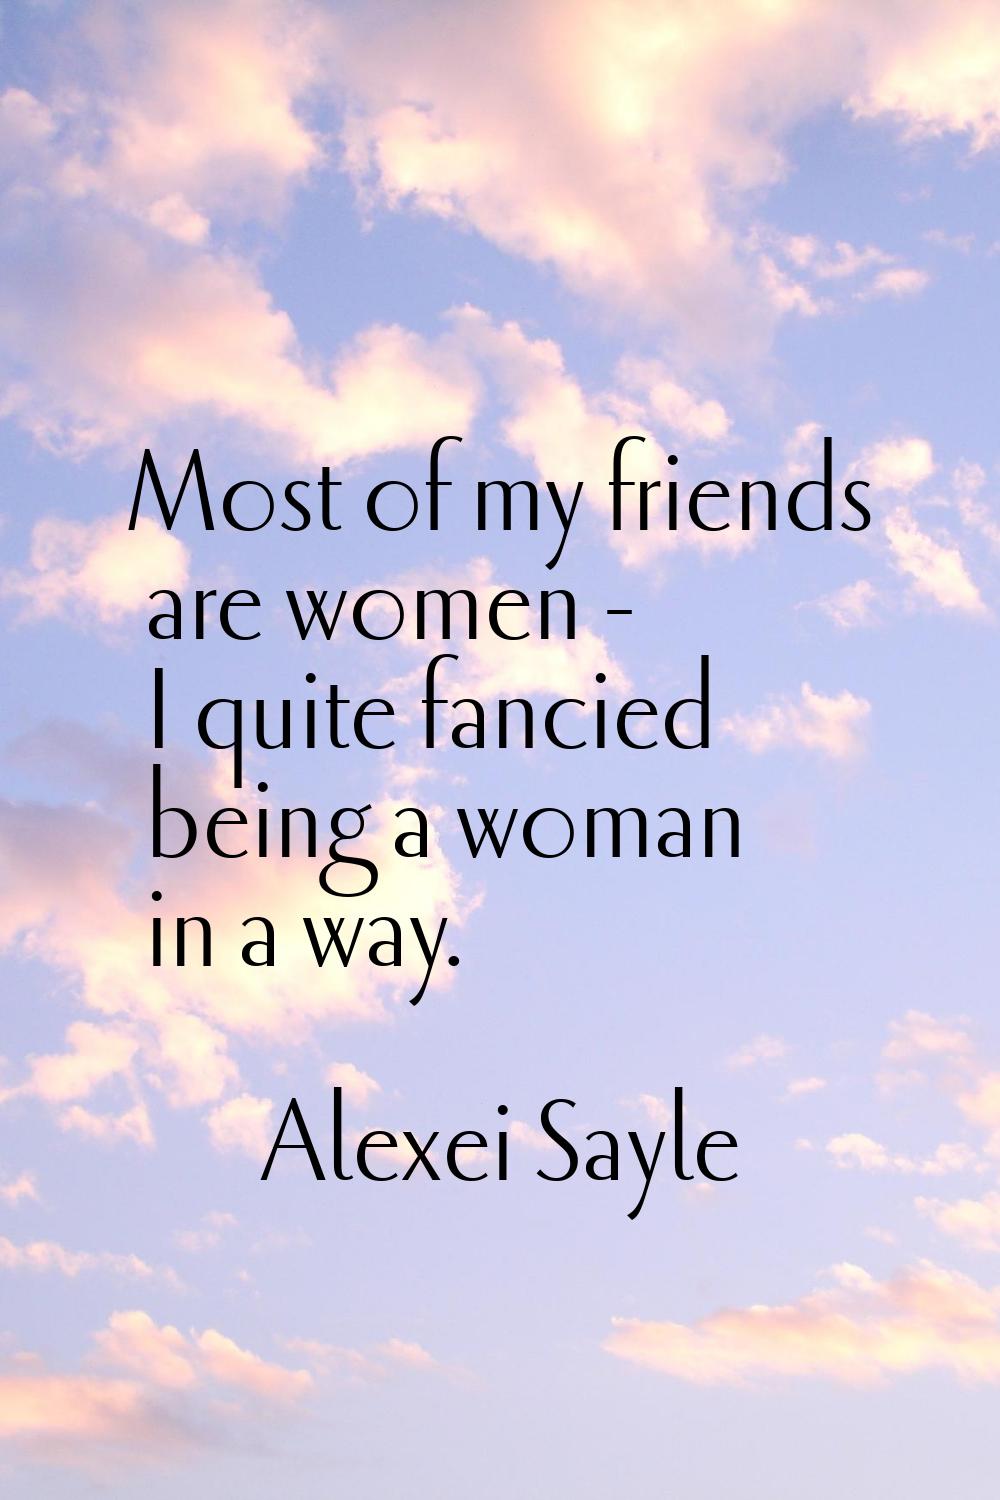 Most of my friends are women - I quite fancied being a woman in a way.